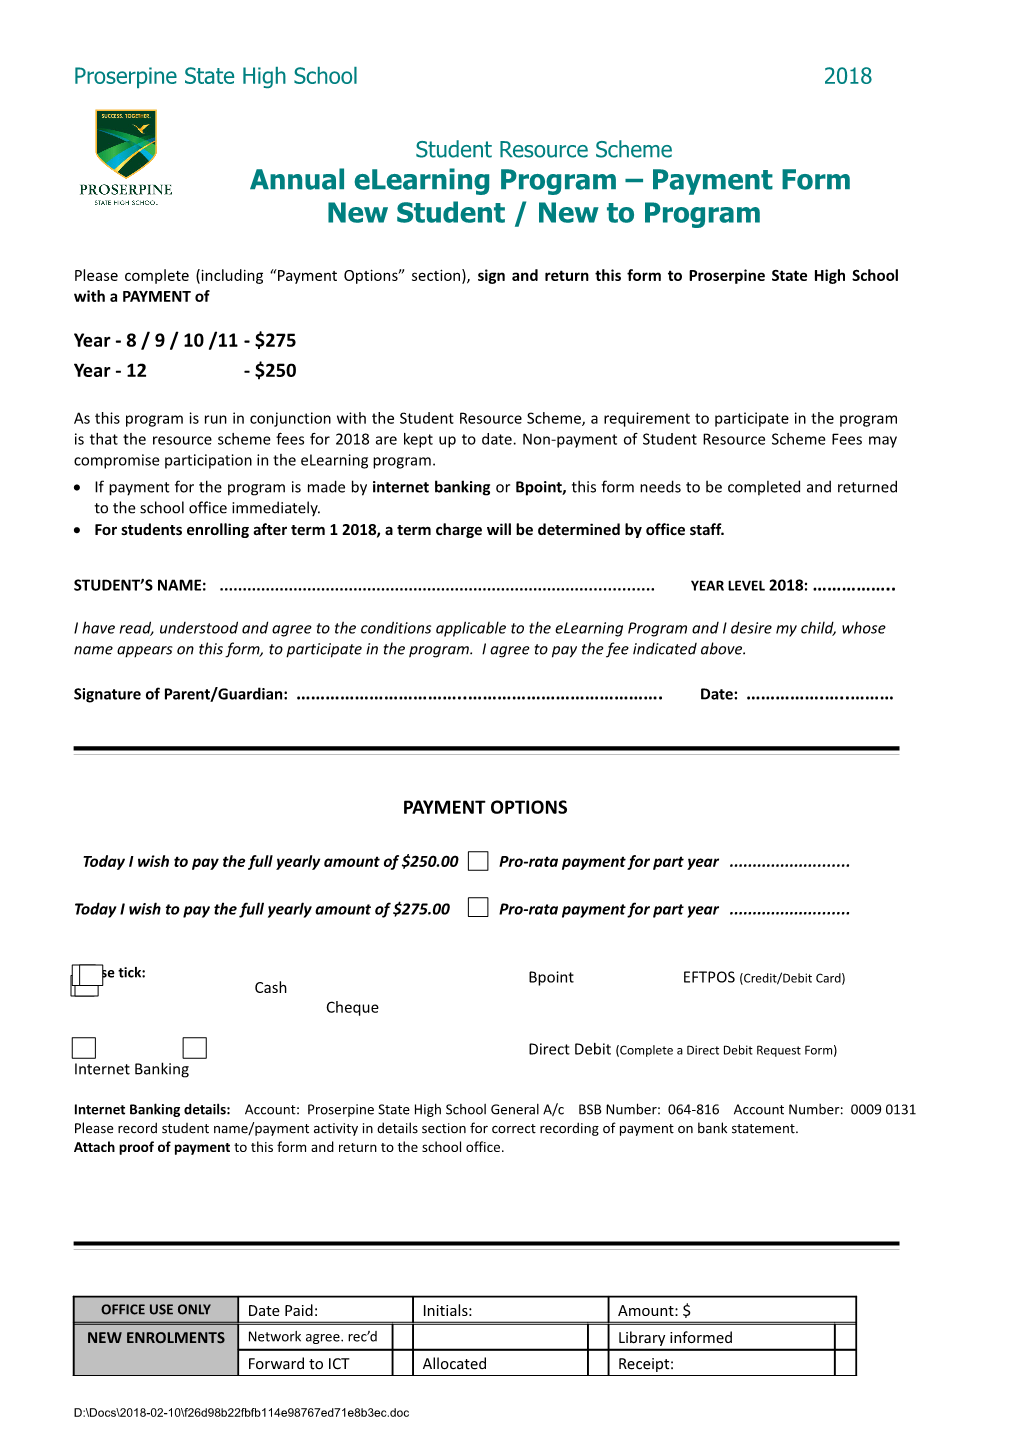 2018 New Student Elearning Payment Form